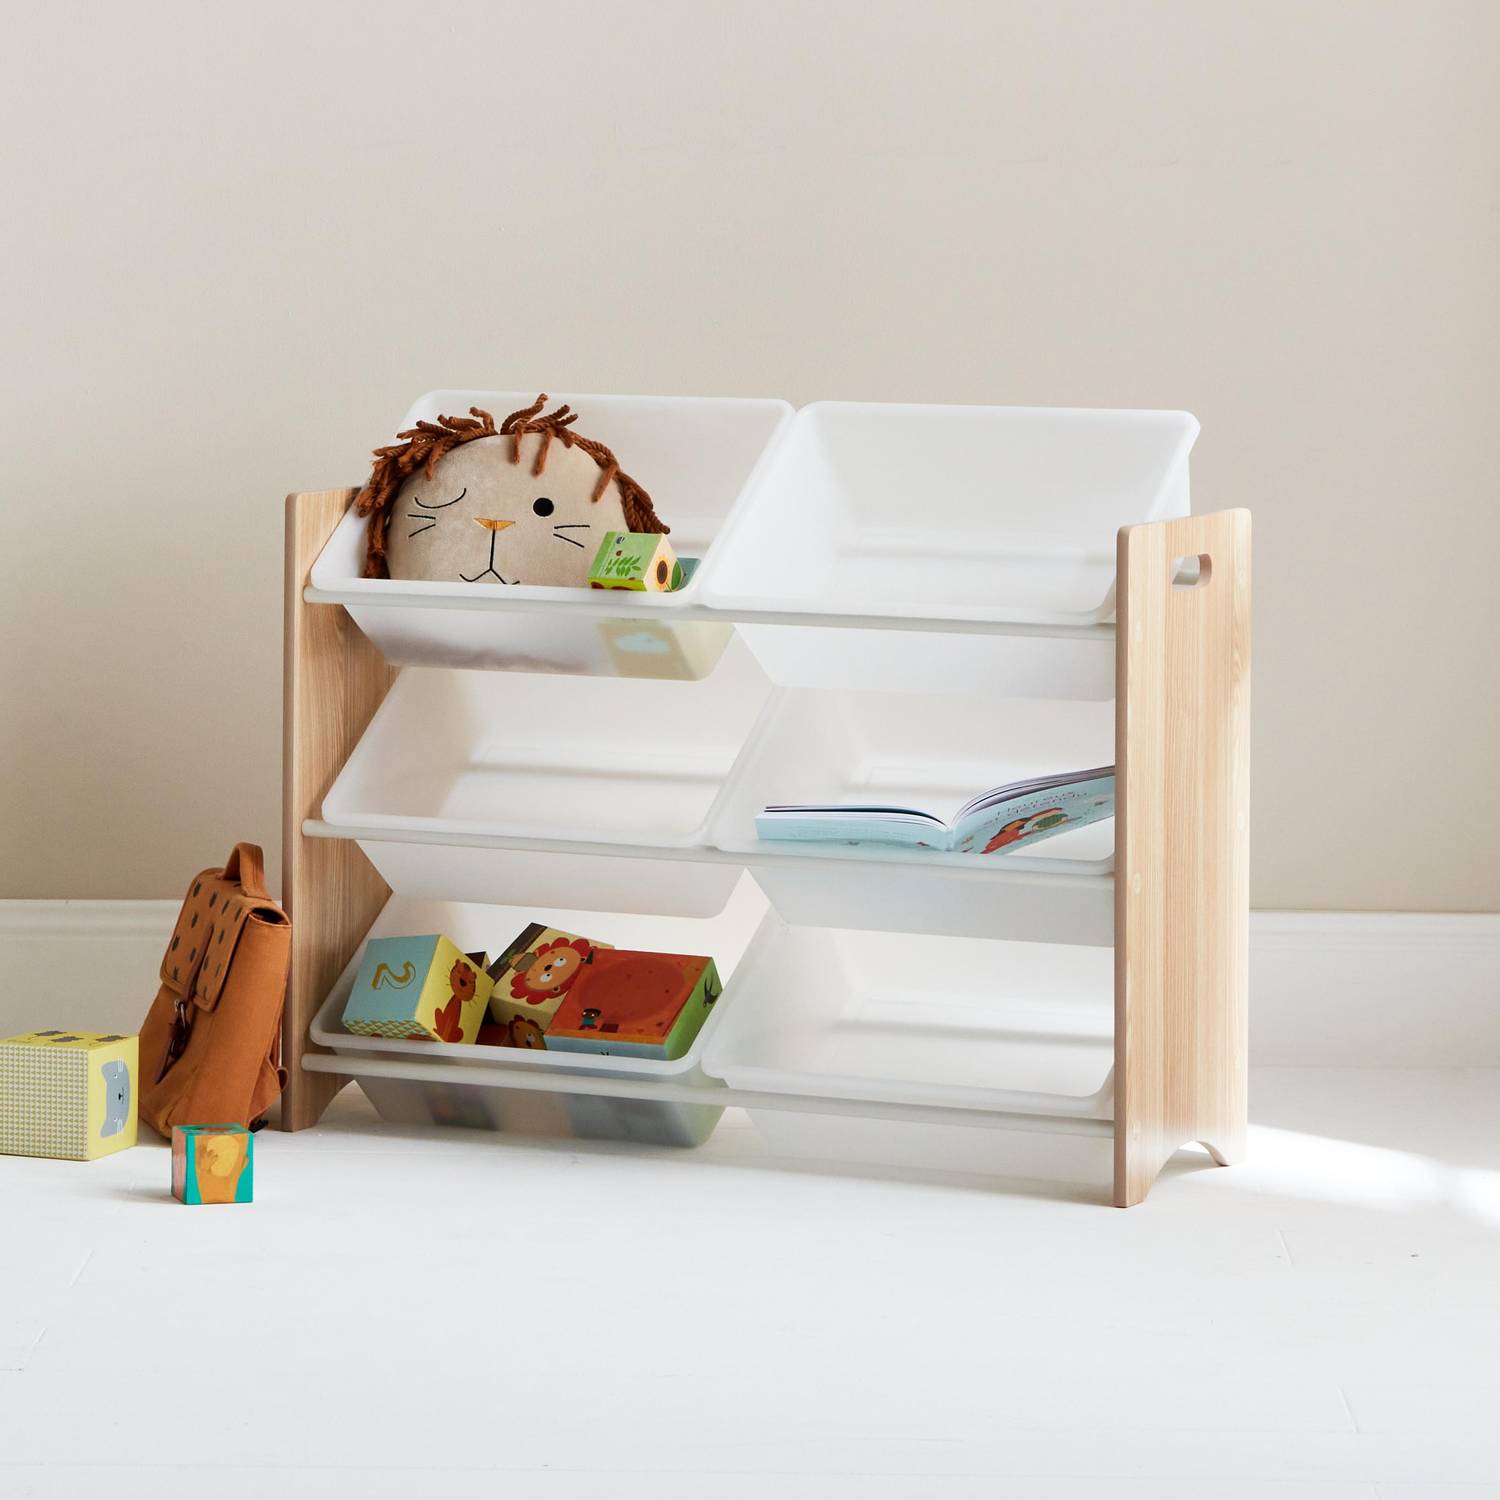 Storage combination with 6 boxes for kids toy, 84x29.5x60cm - Tobias - Natural wood colour Photo2